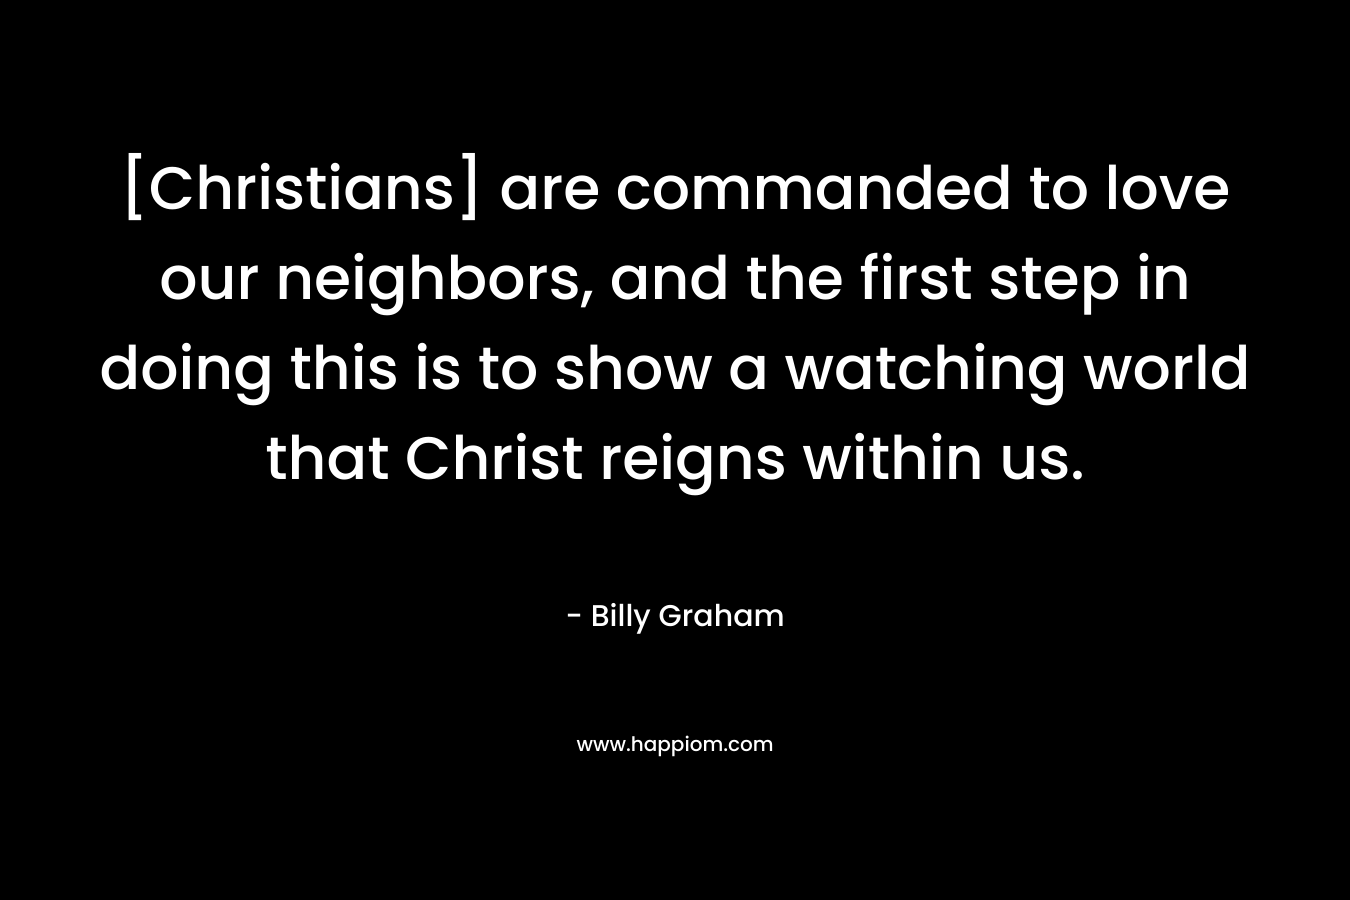 [Christians] are commanded to love our neighbors, and the first step in doing this is to show a watching world that Christ reigns within us.